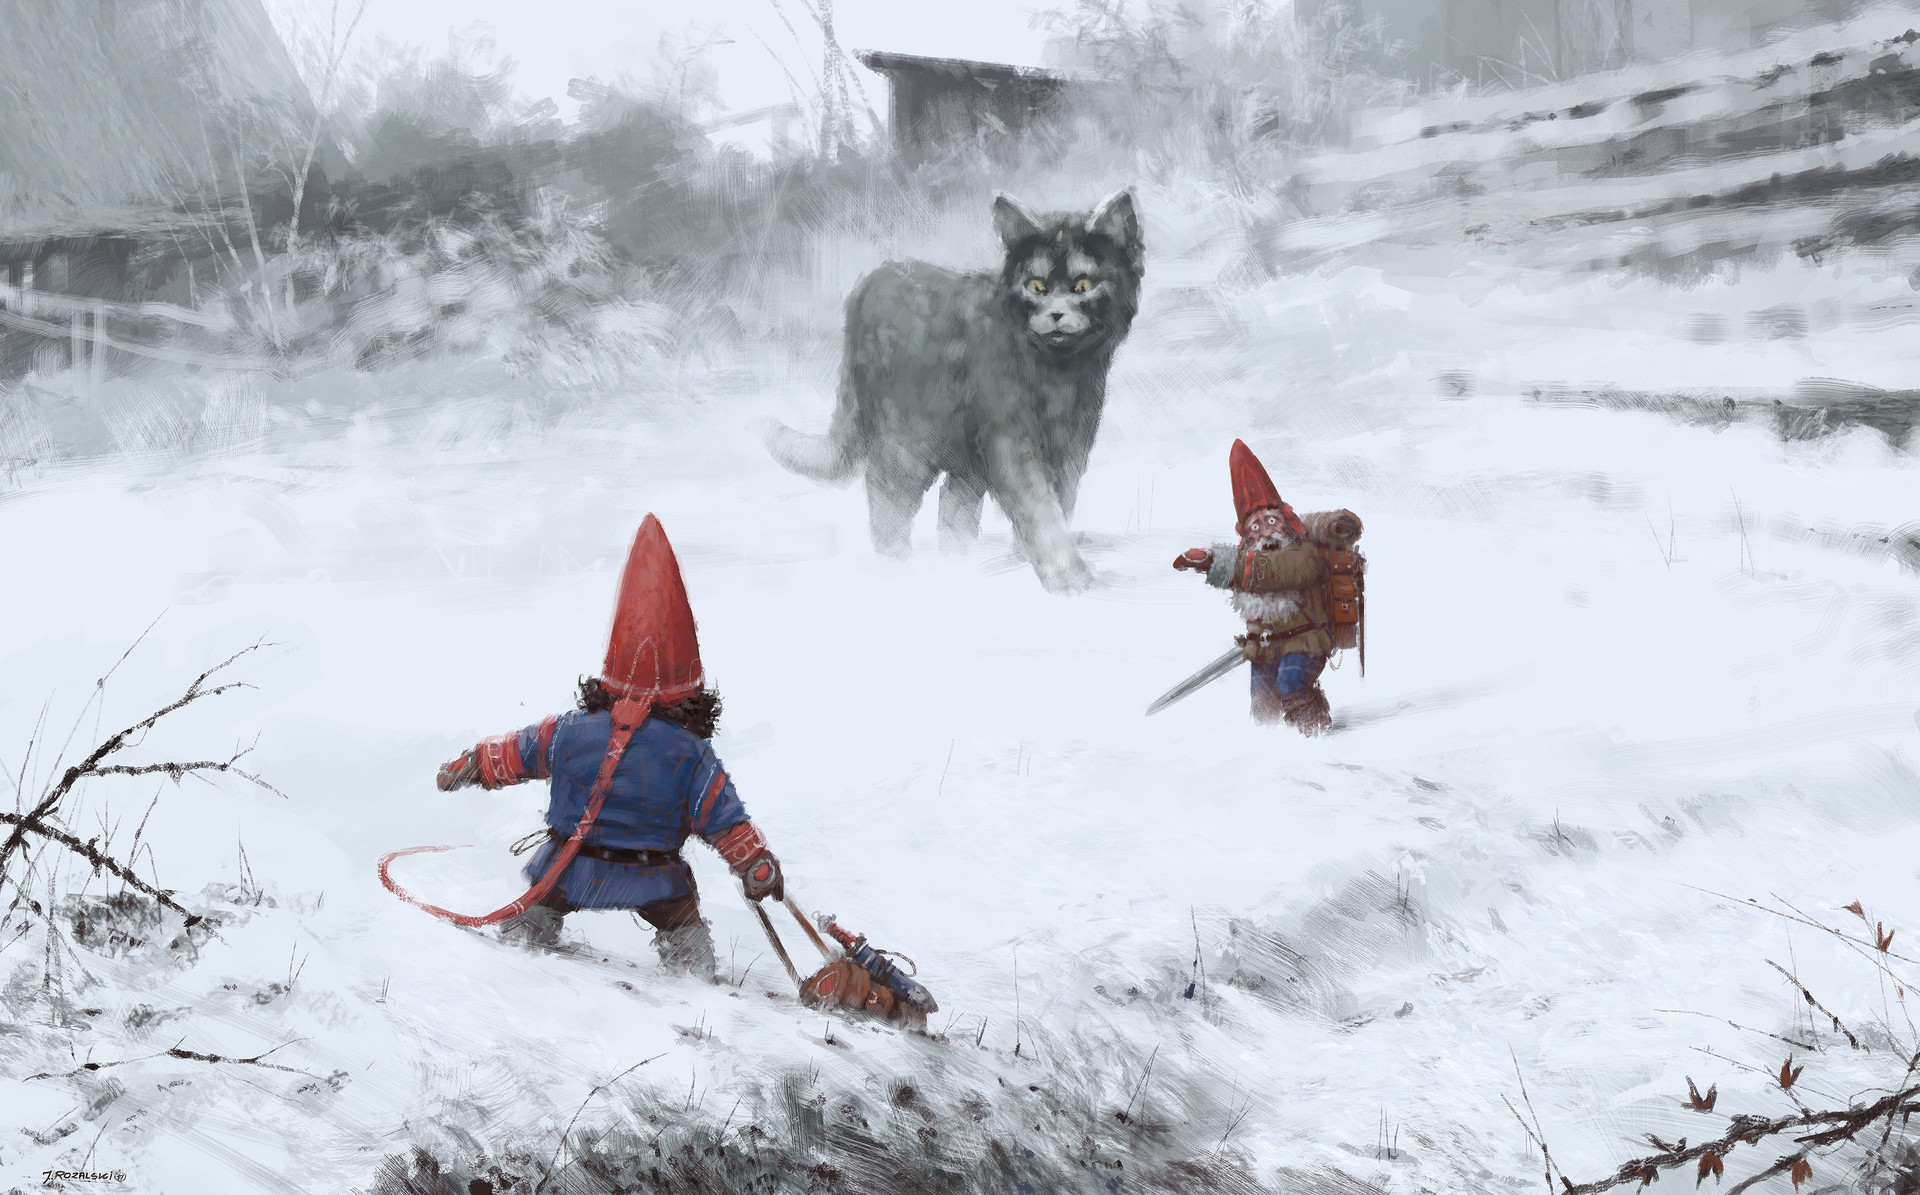 Two tiny gnomes face a terrifying giant cat in the snow